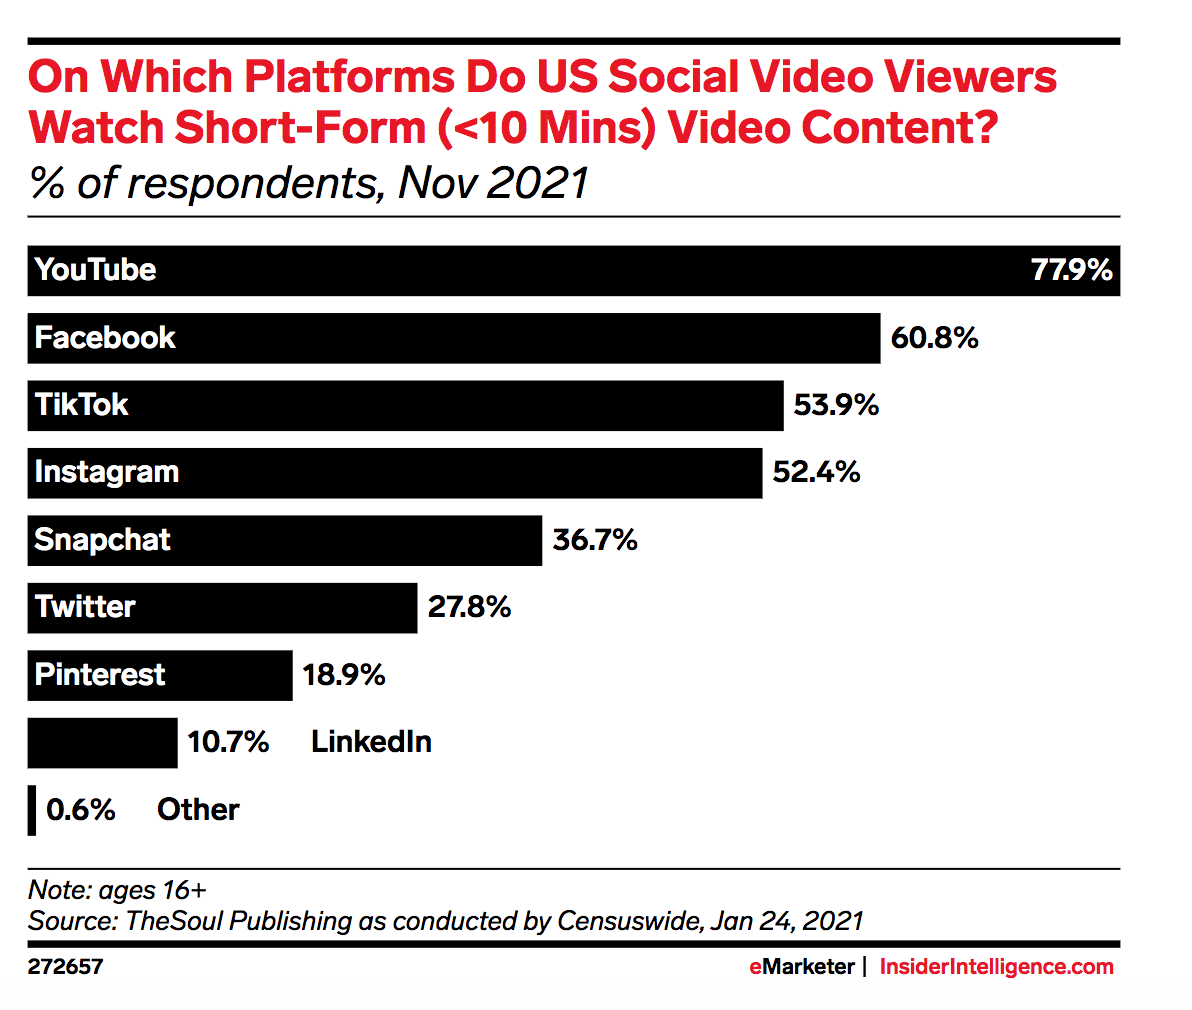 InsiderIntelligence on which platforms do US social video viewers watch shot-form video content | Vista Social